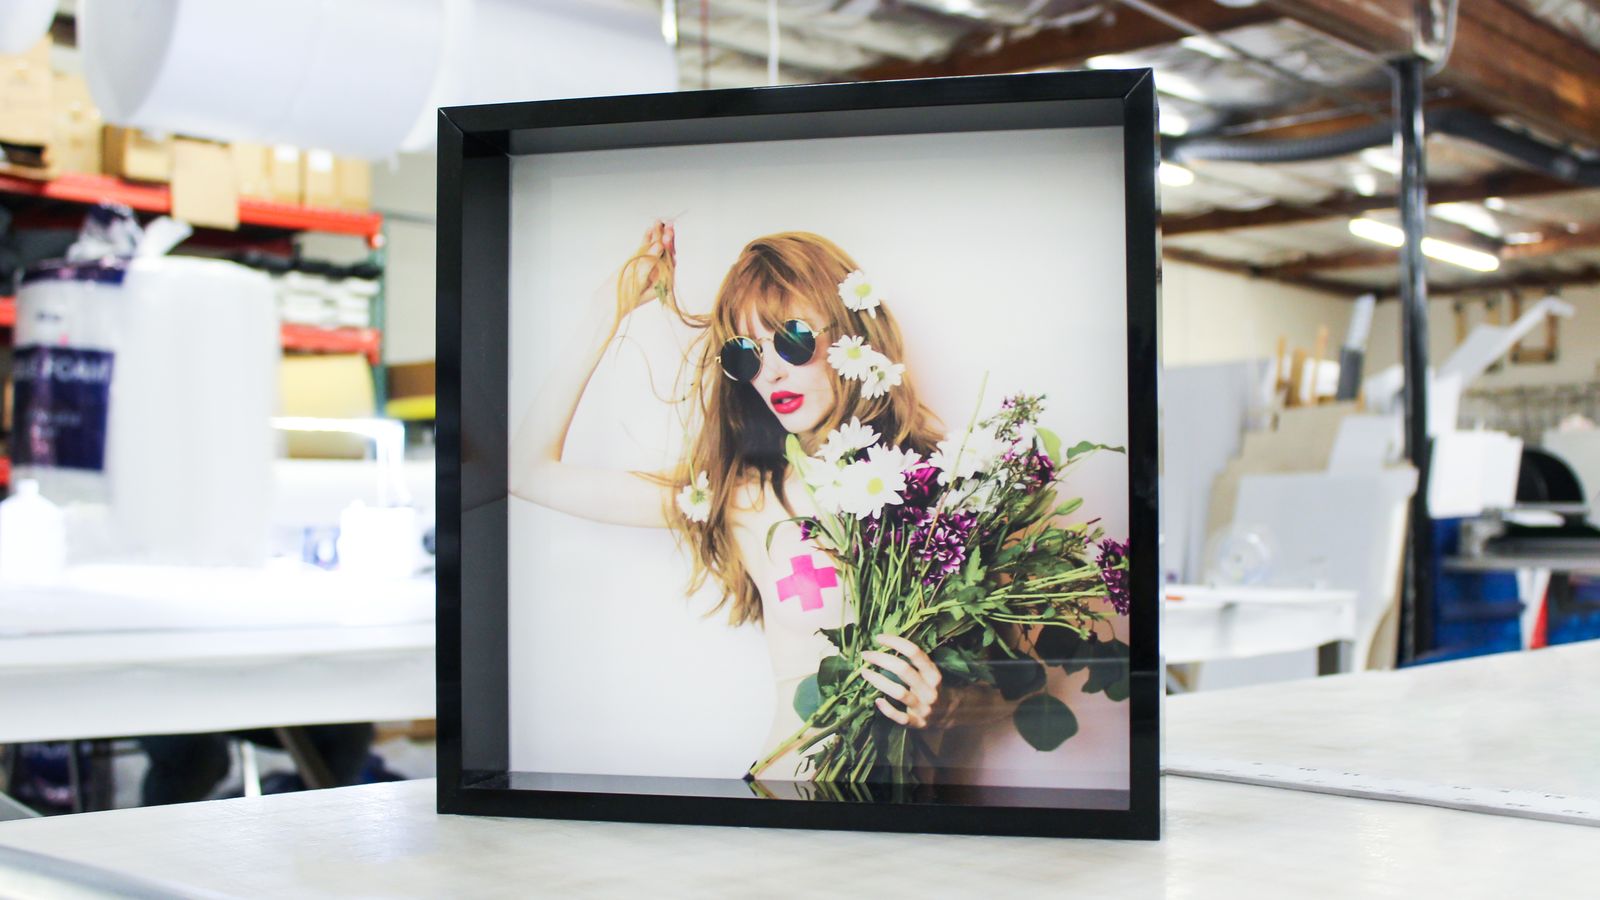 decorative custom indoor sign with a girl photo print made of acrylic for interior branding